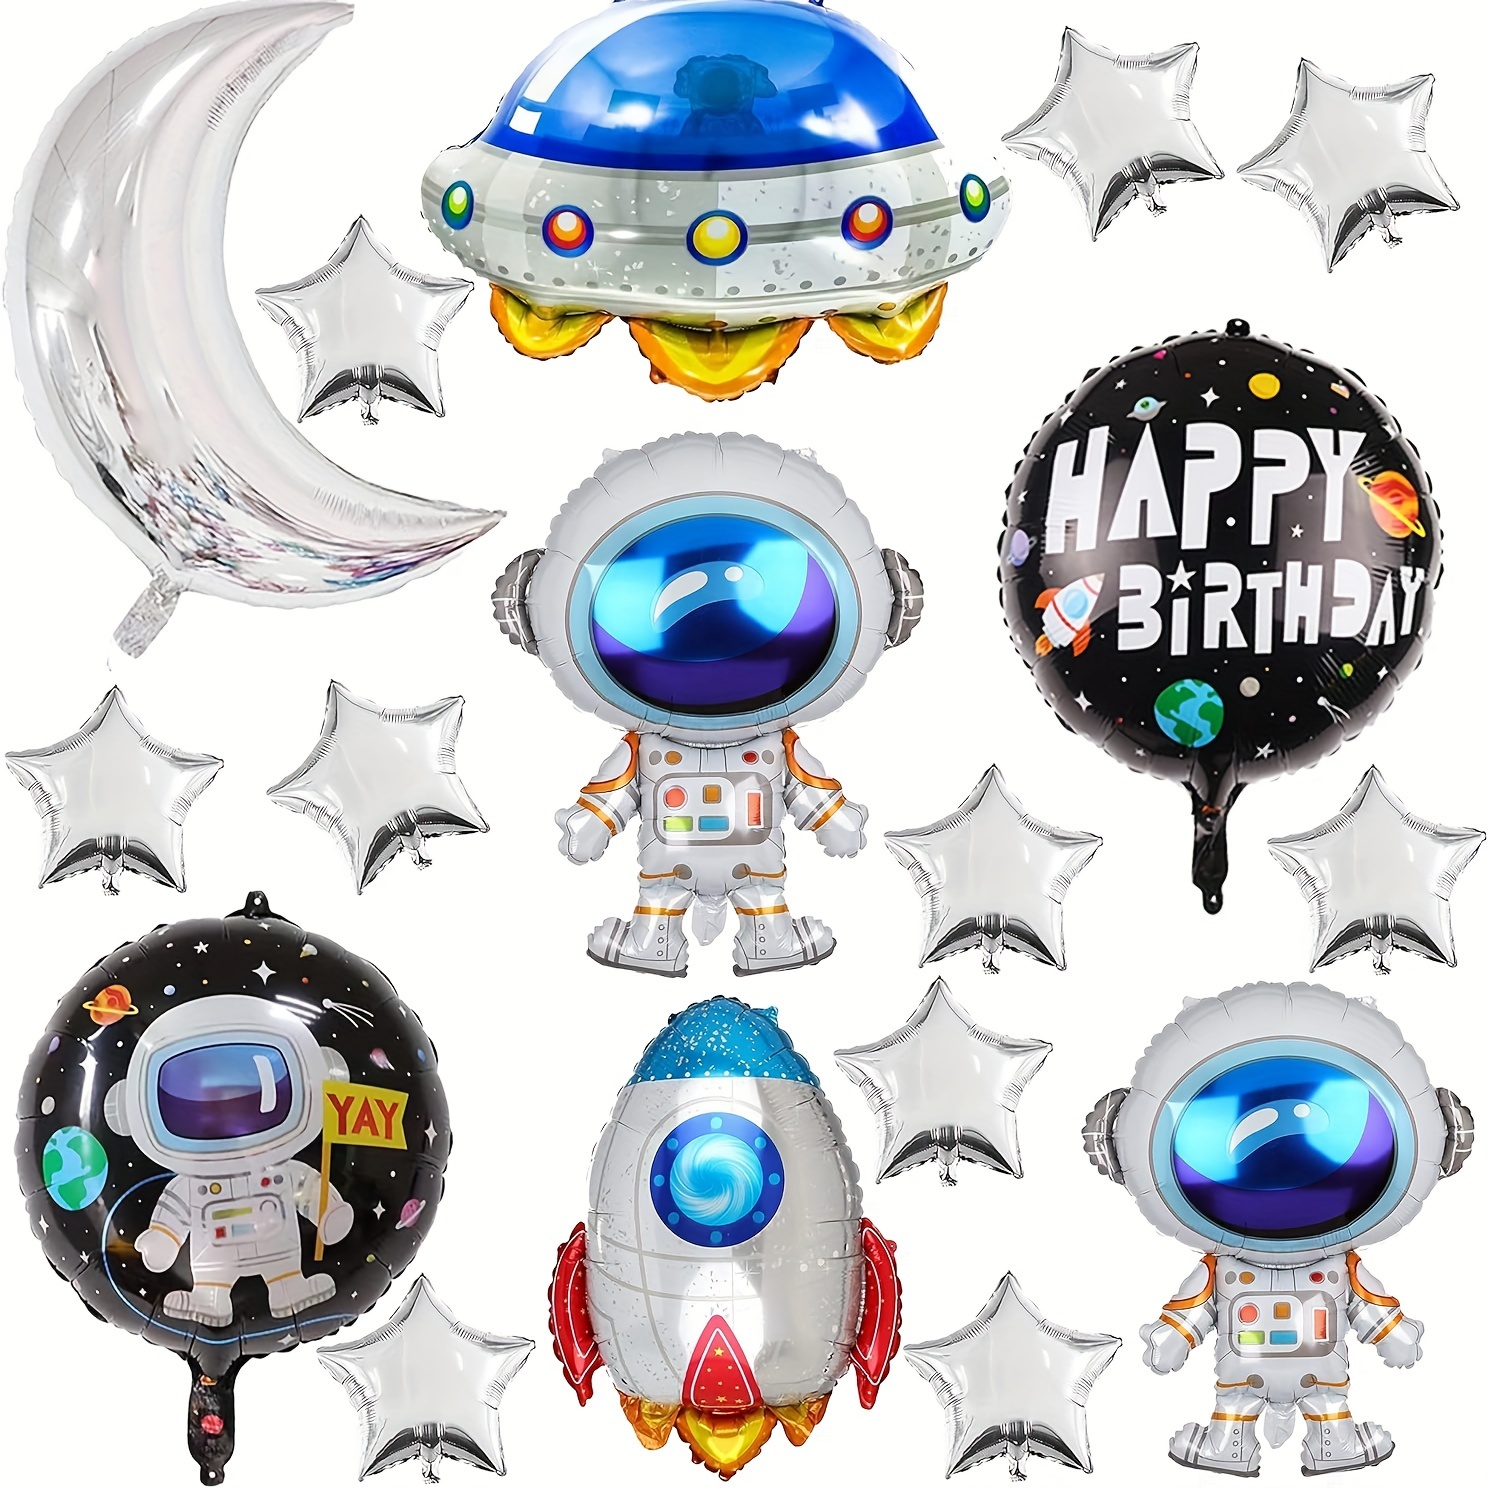 

18pcs Astronaut Spaceman Foil Balloons, Rocket Airship Star Moon Balloons Helium Balloons Space Galaxy Themed Party Supplies Happy Birthday, Baby Shower Outer Space Decoration